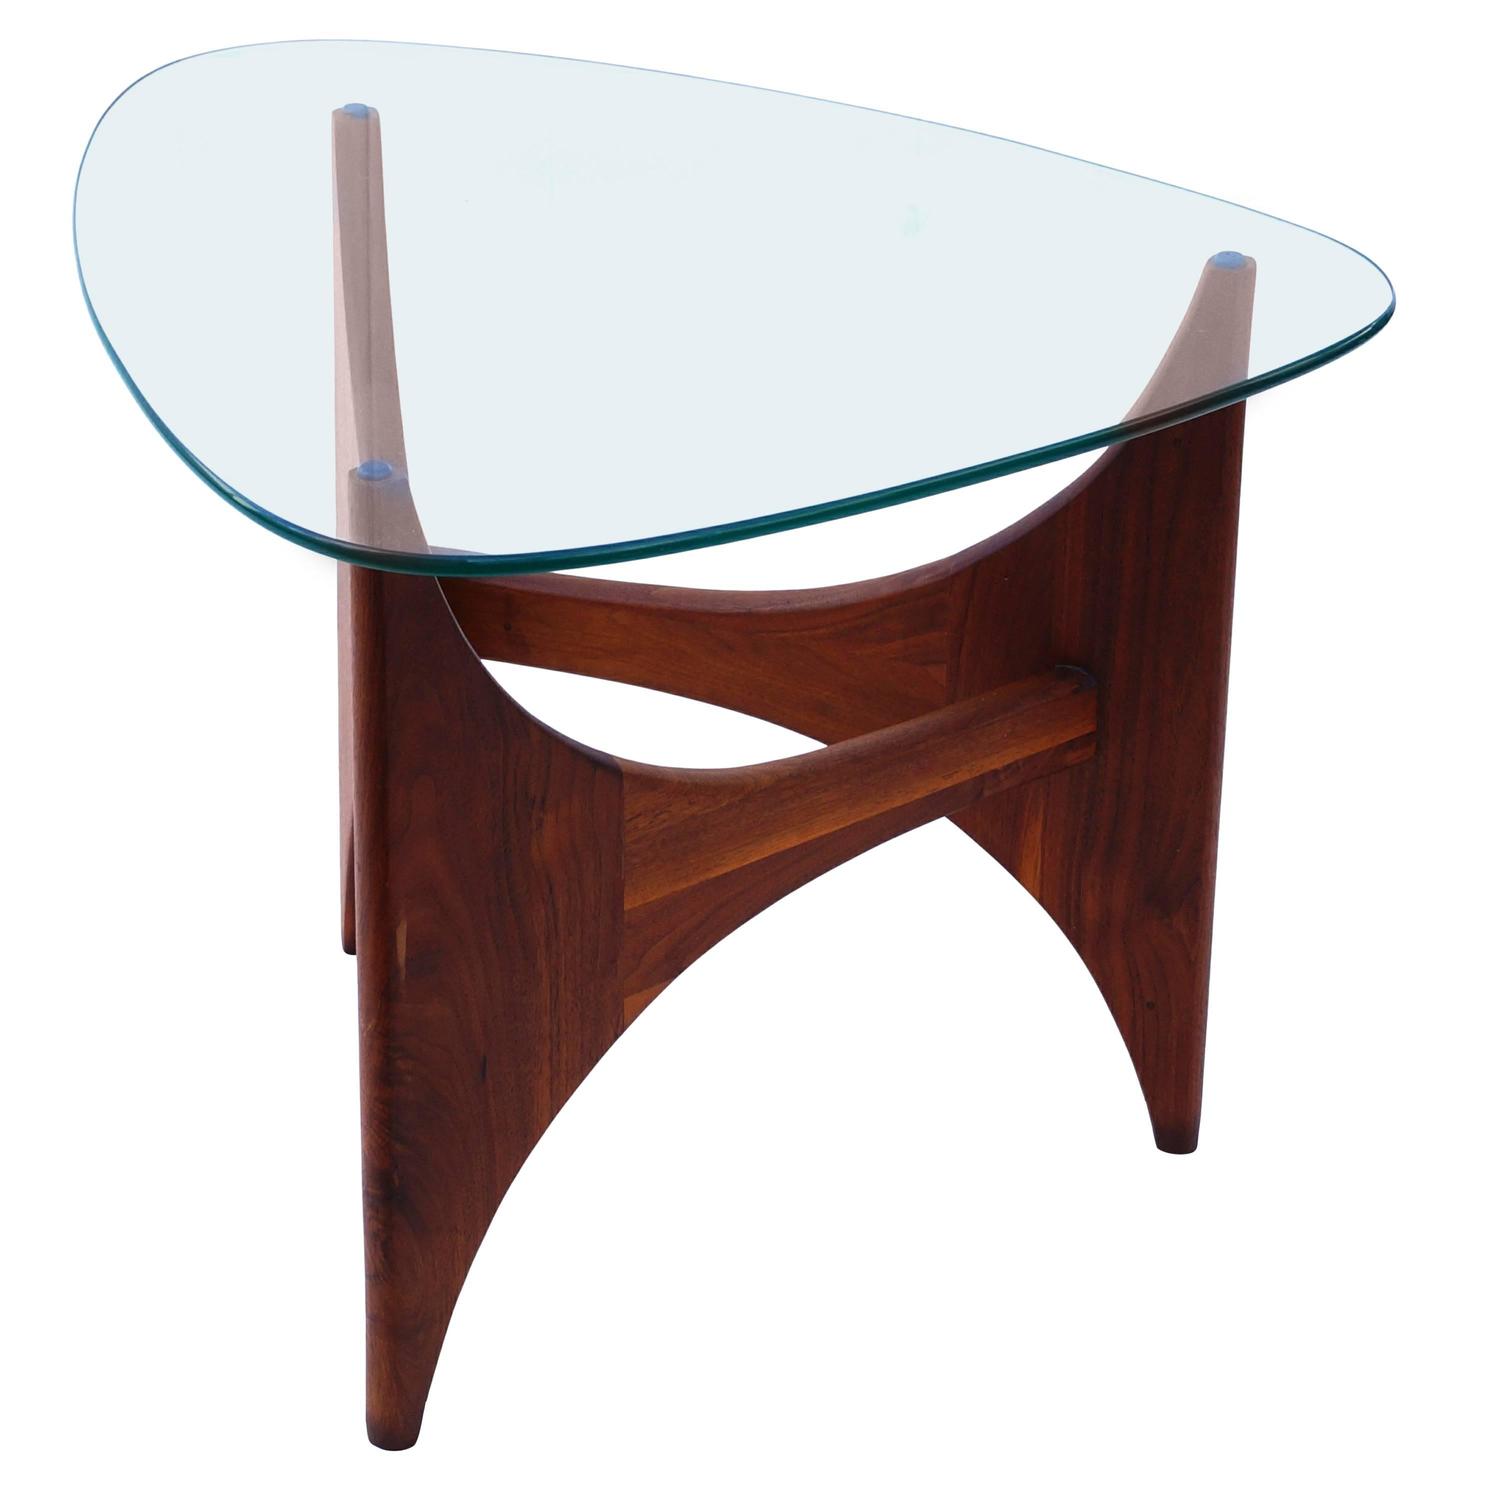 Adrian Pearsall Mid-Century Modern Side End Glass Top Table at 1stdibs